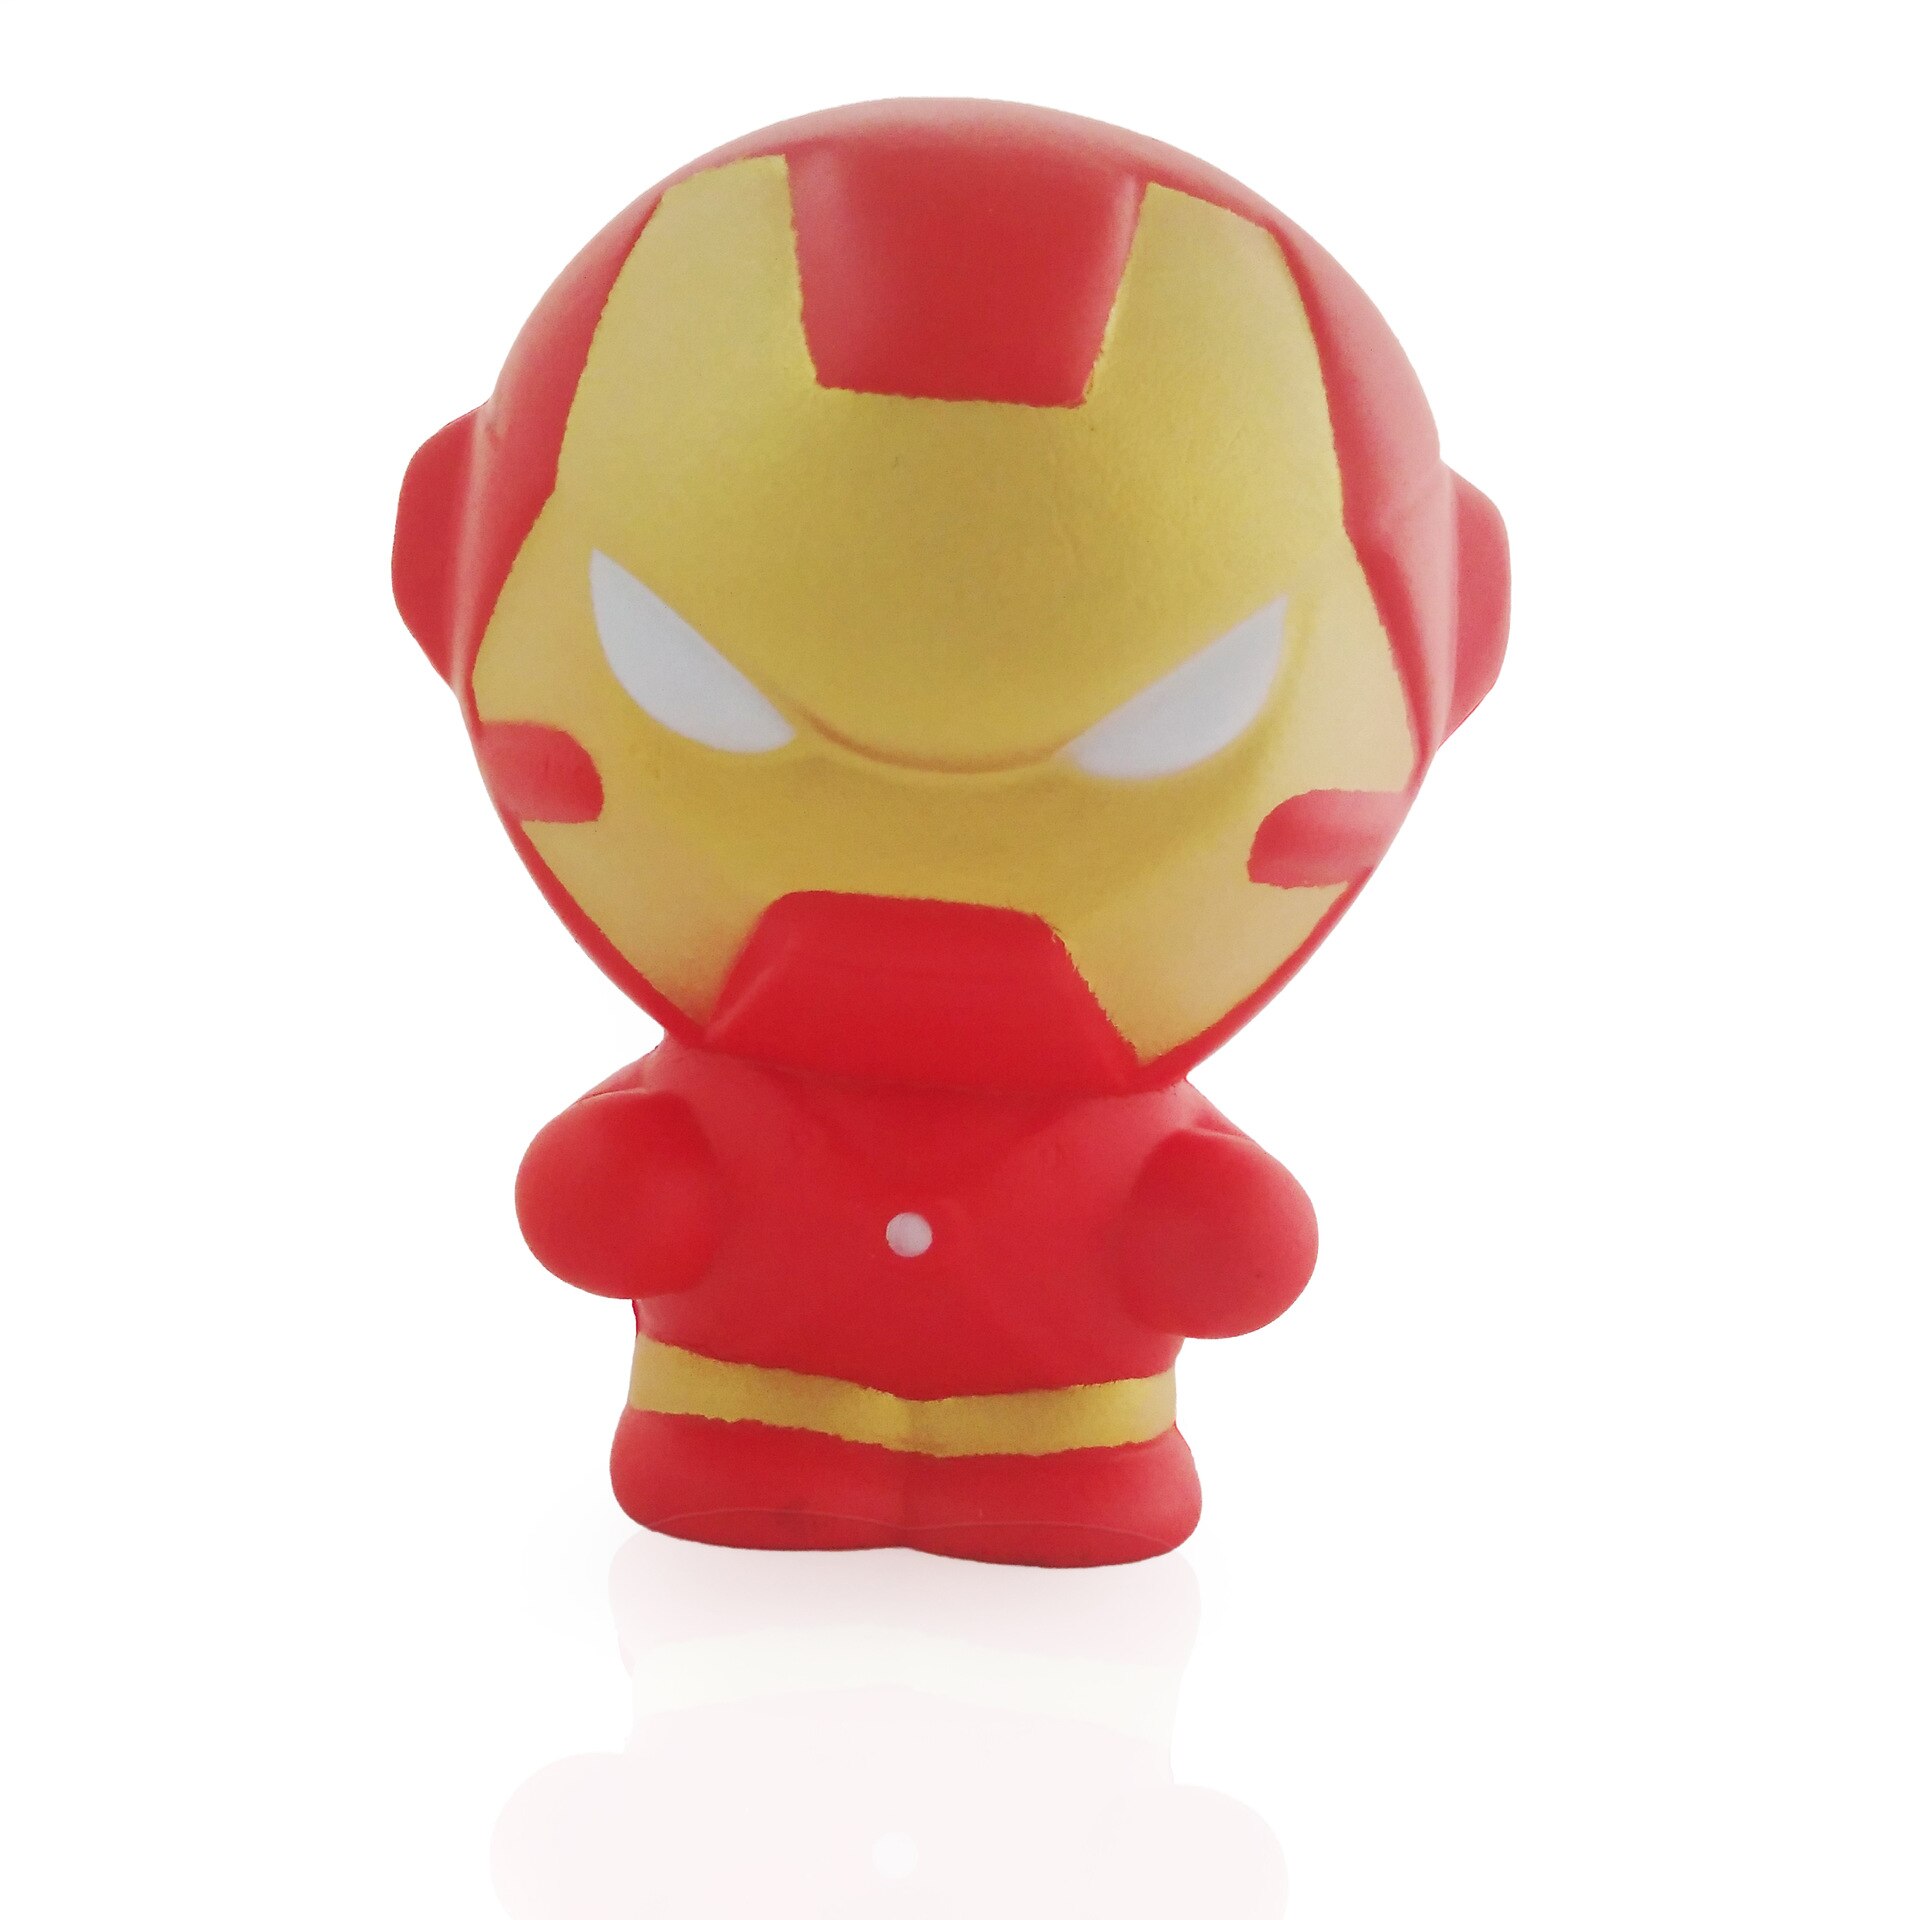 Marvel Squishy Kawaii Squishy Squish Spiderman Hulk Iron Man Thanos Squishies Slow Rising Stress Relief Squeeze 4 - Simple Dimple Fidget